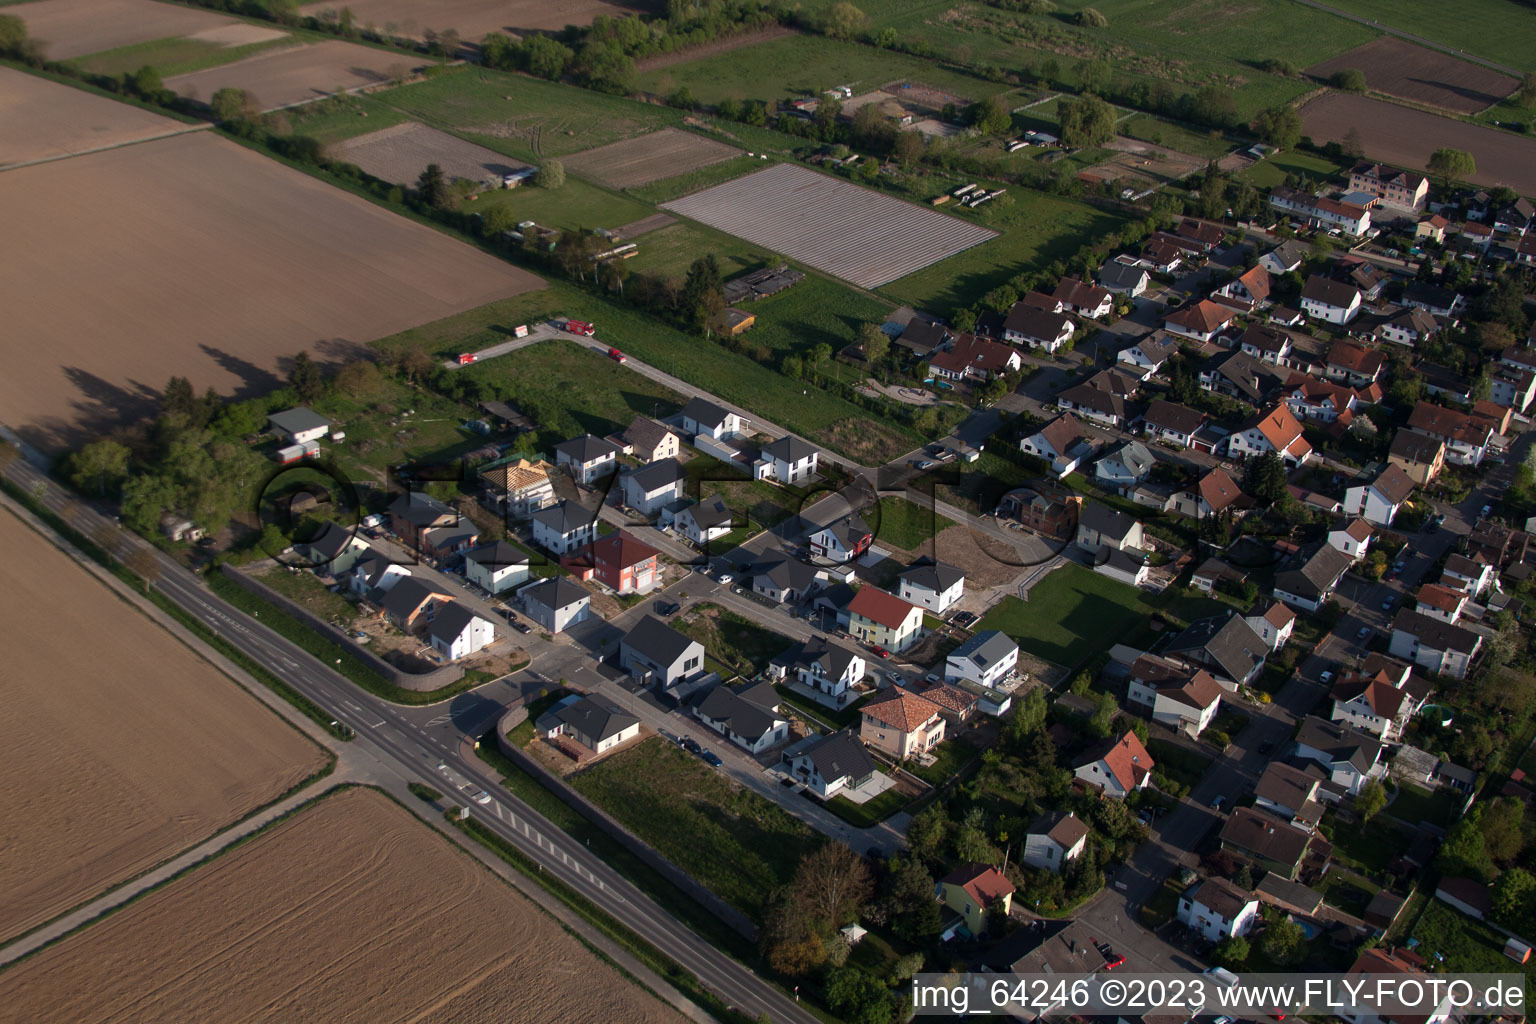 New development area east in Minfeld in the state Rhineland-Palatinate, Germany from the drone perspective